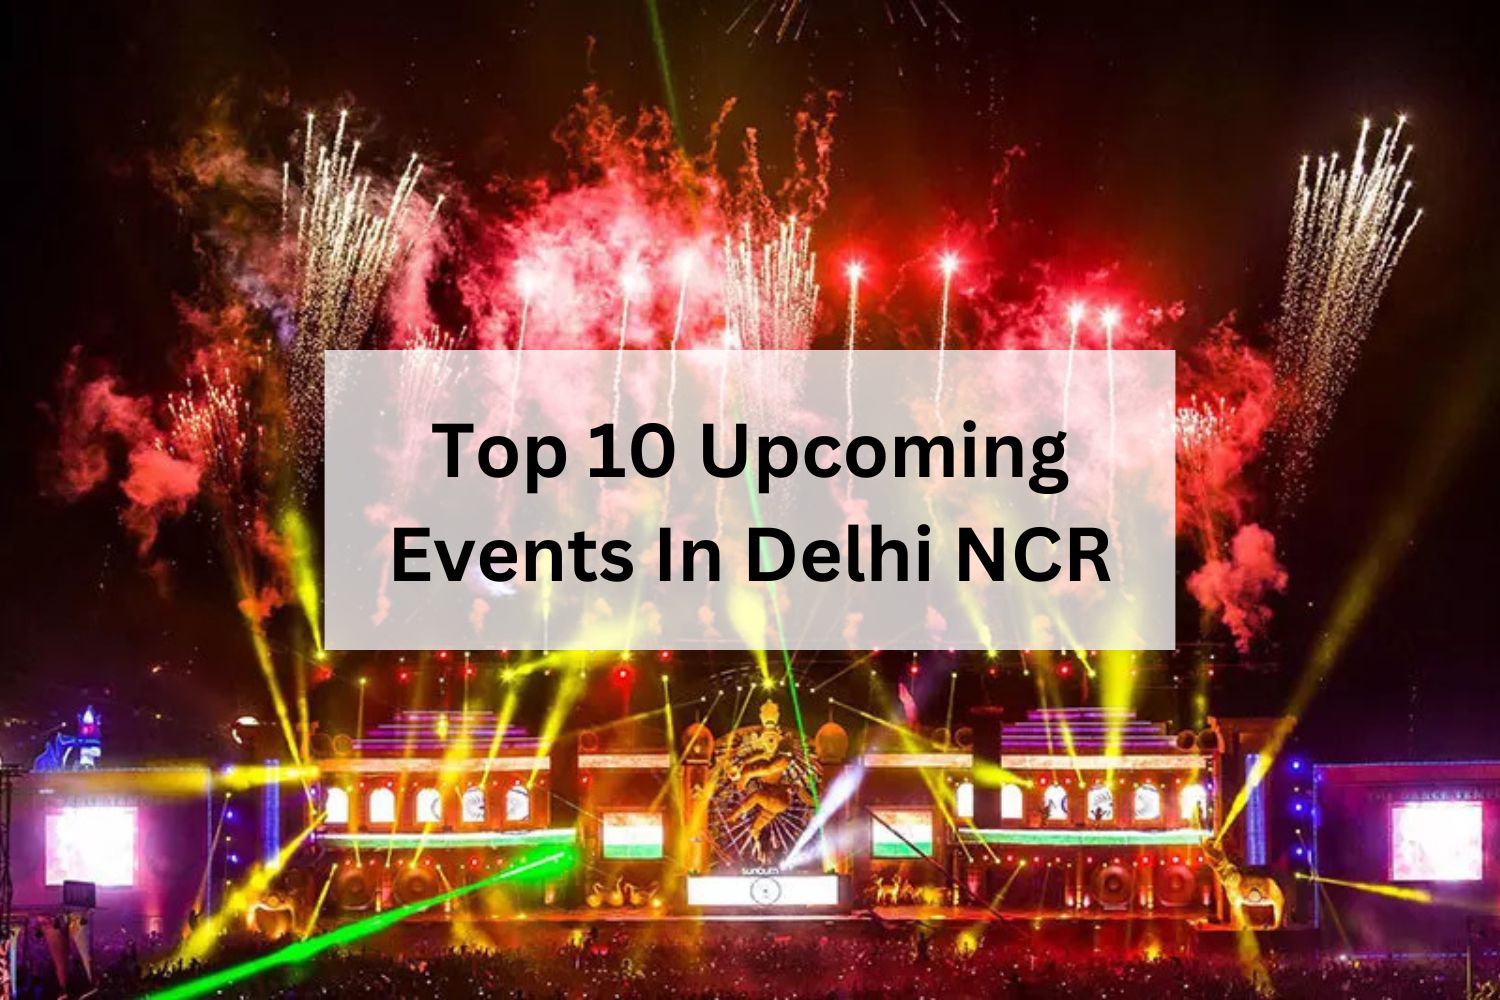 Top 10 Upcoming Events In Delhi NCR